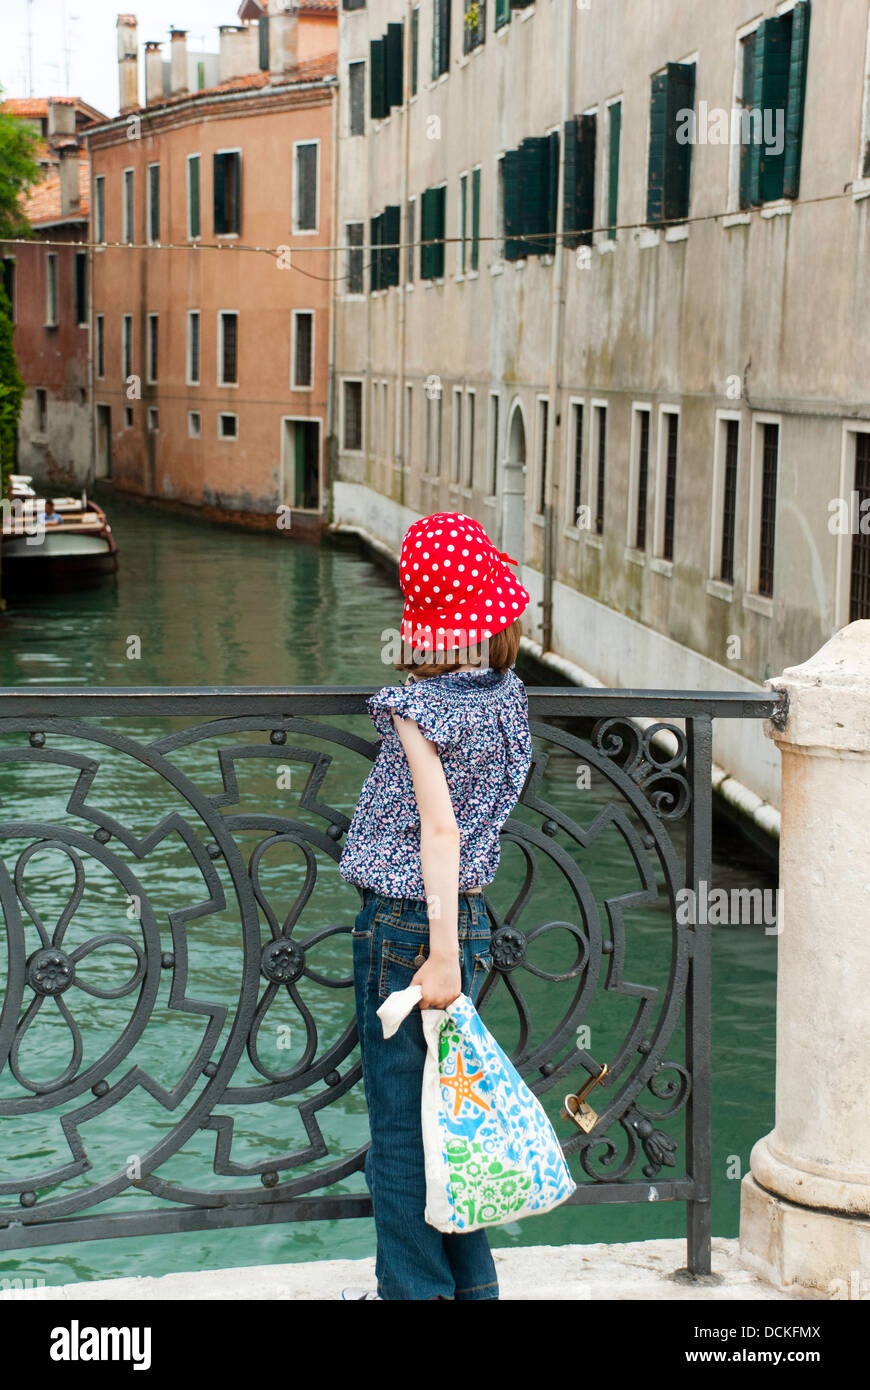 Young girl in red hat standing on a small bridge looking at a Venetian canal, Venice, Italy Stock Photo